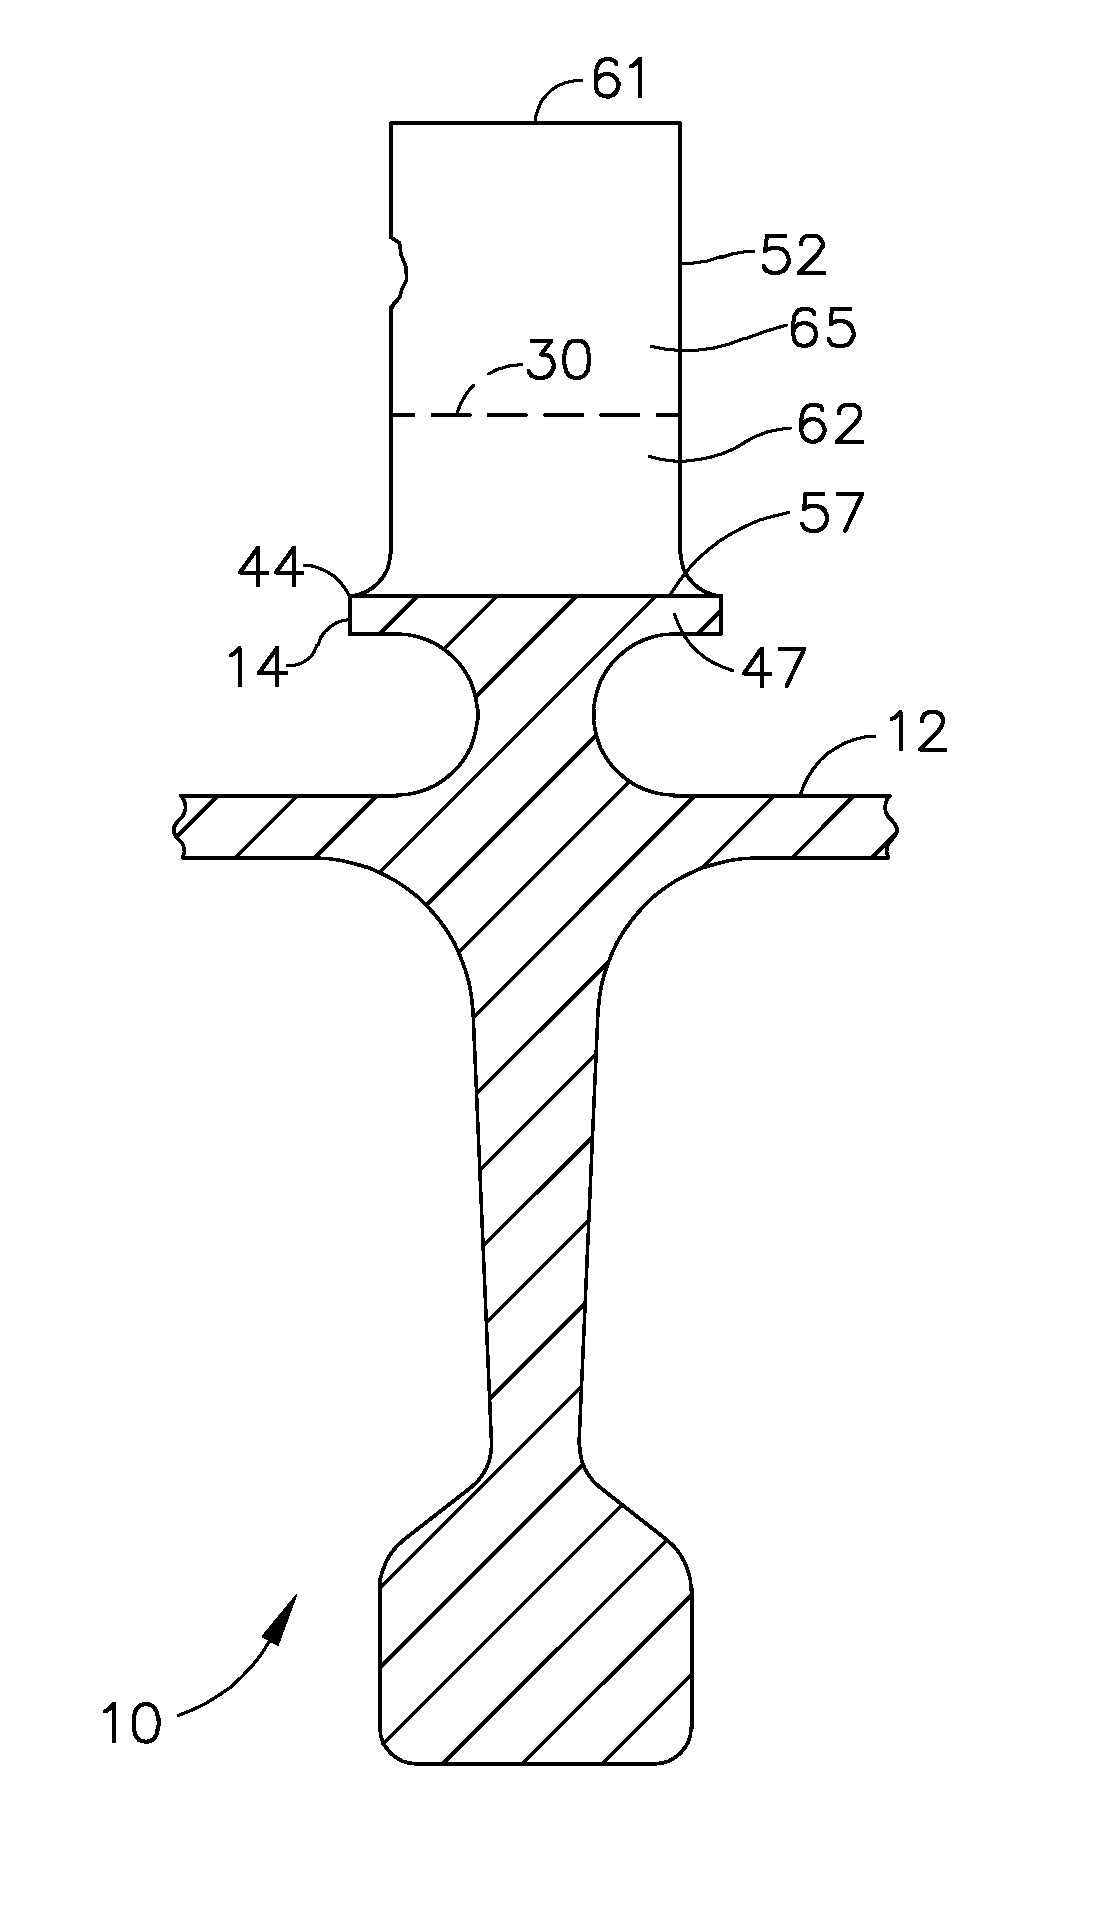 Solid state resistance welding for airfoil repair and manufacture